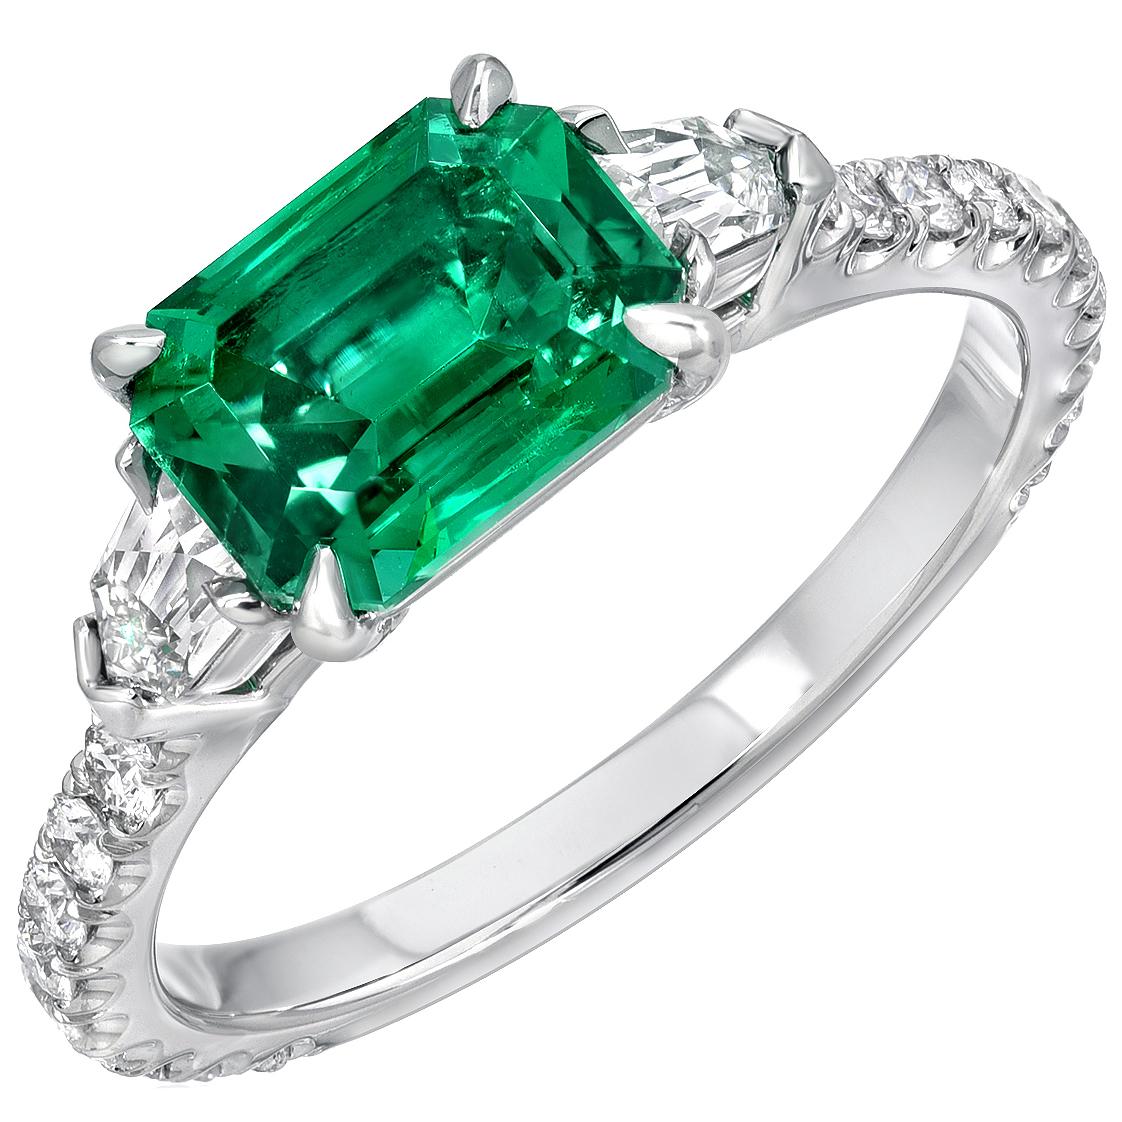 Exceptional platinum ring featuring a collection-quality 1.47 carat, no oil, emerald-cut Emerald, from Panjshir Afghanistan. This Emerald is flanked by a pair of 0.27 carat total, French-Cut bullet shaped diamonds, E color and VS1 clarity, and